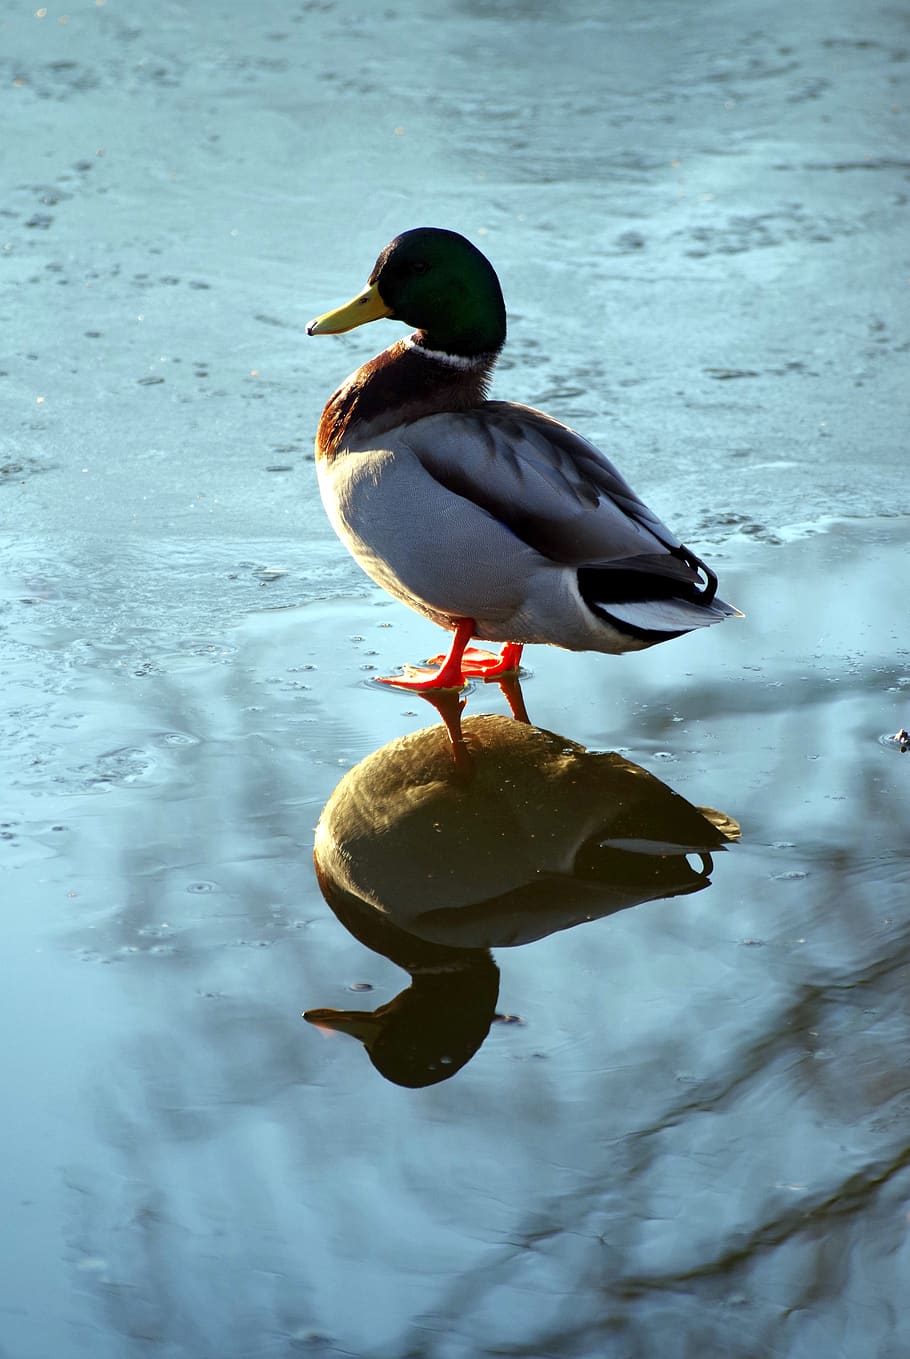 duck, frozen, bird, water, ice rink, pond, cold, frost, winter, animal themes